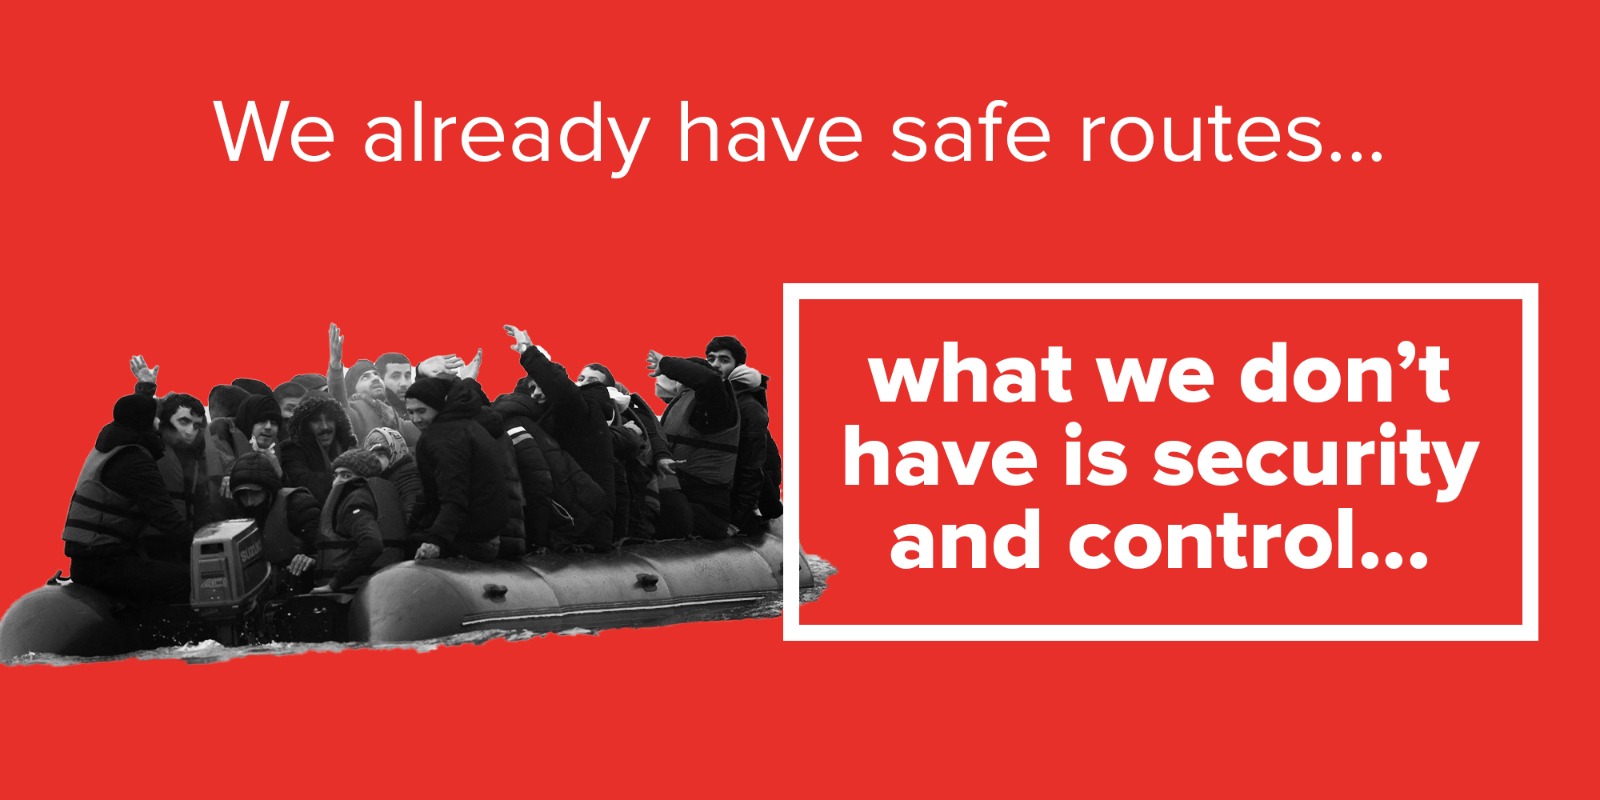 180000-have-come-via-safe-and-legal-routes-since-2004